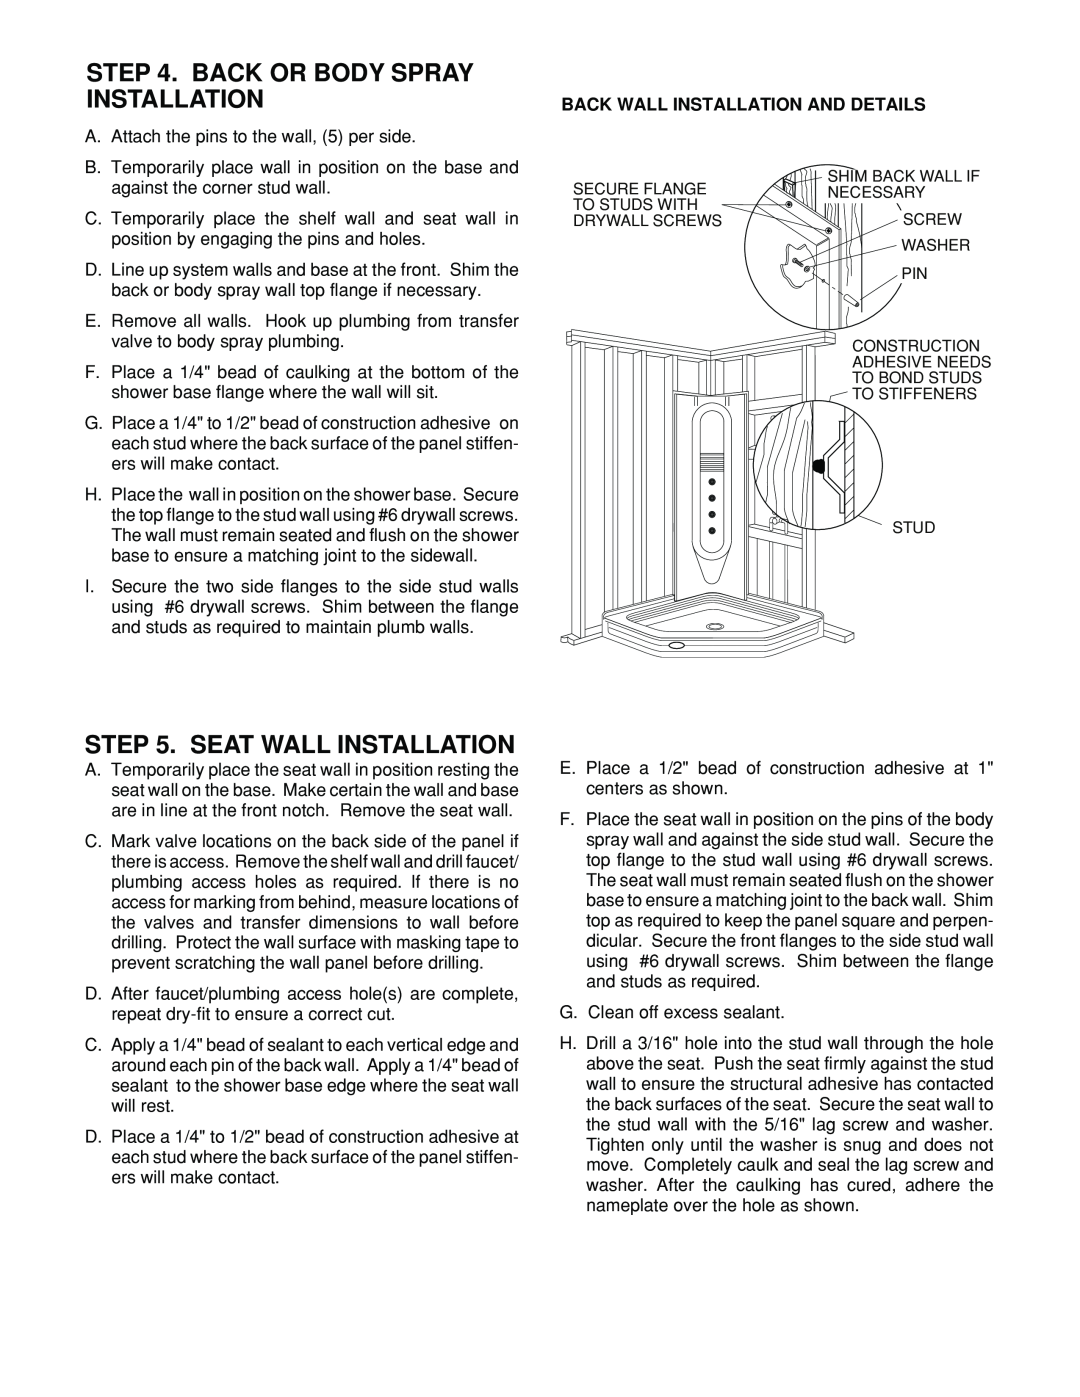 Jacuzzi Neo Angle Shower System installation instructions Back Or Body Spray Installation, Seat Wall Installation 